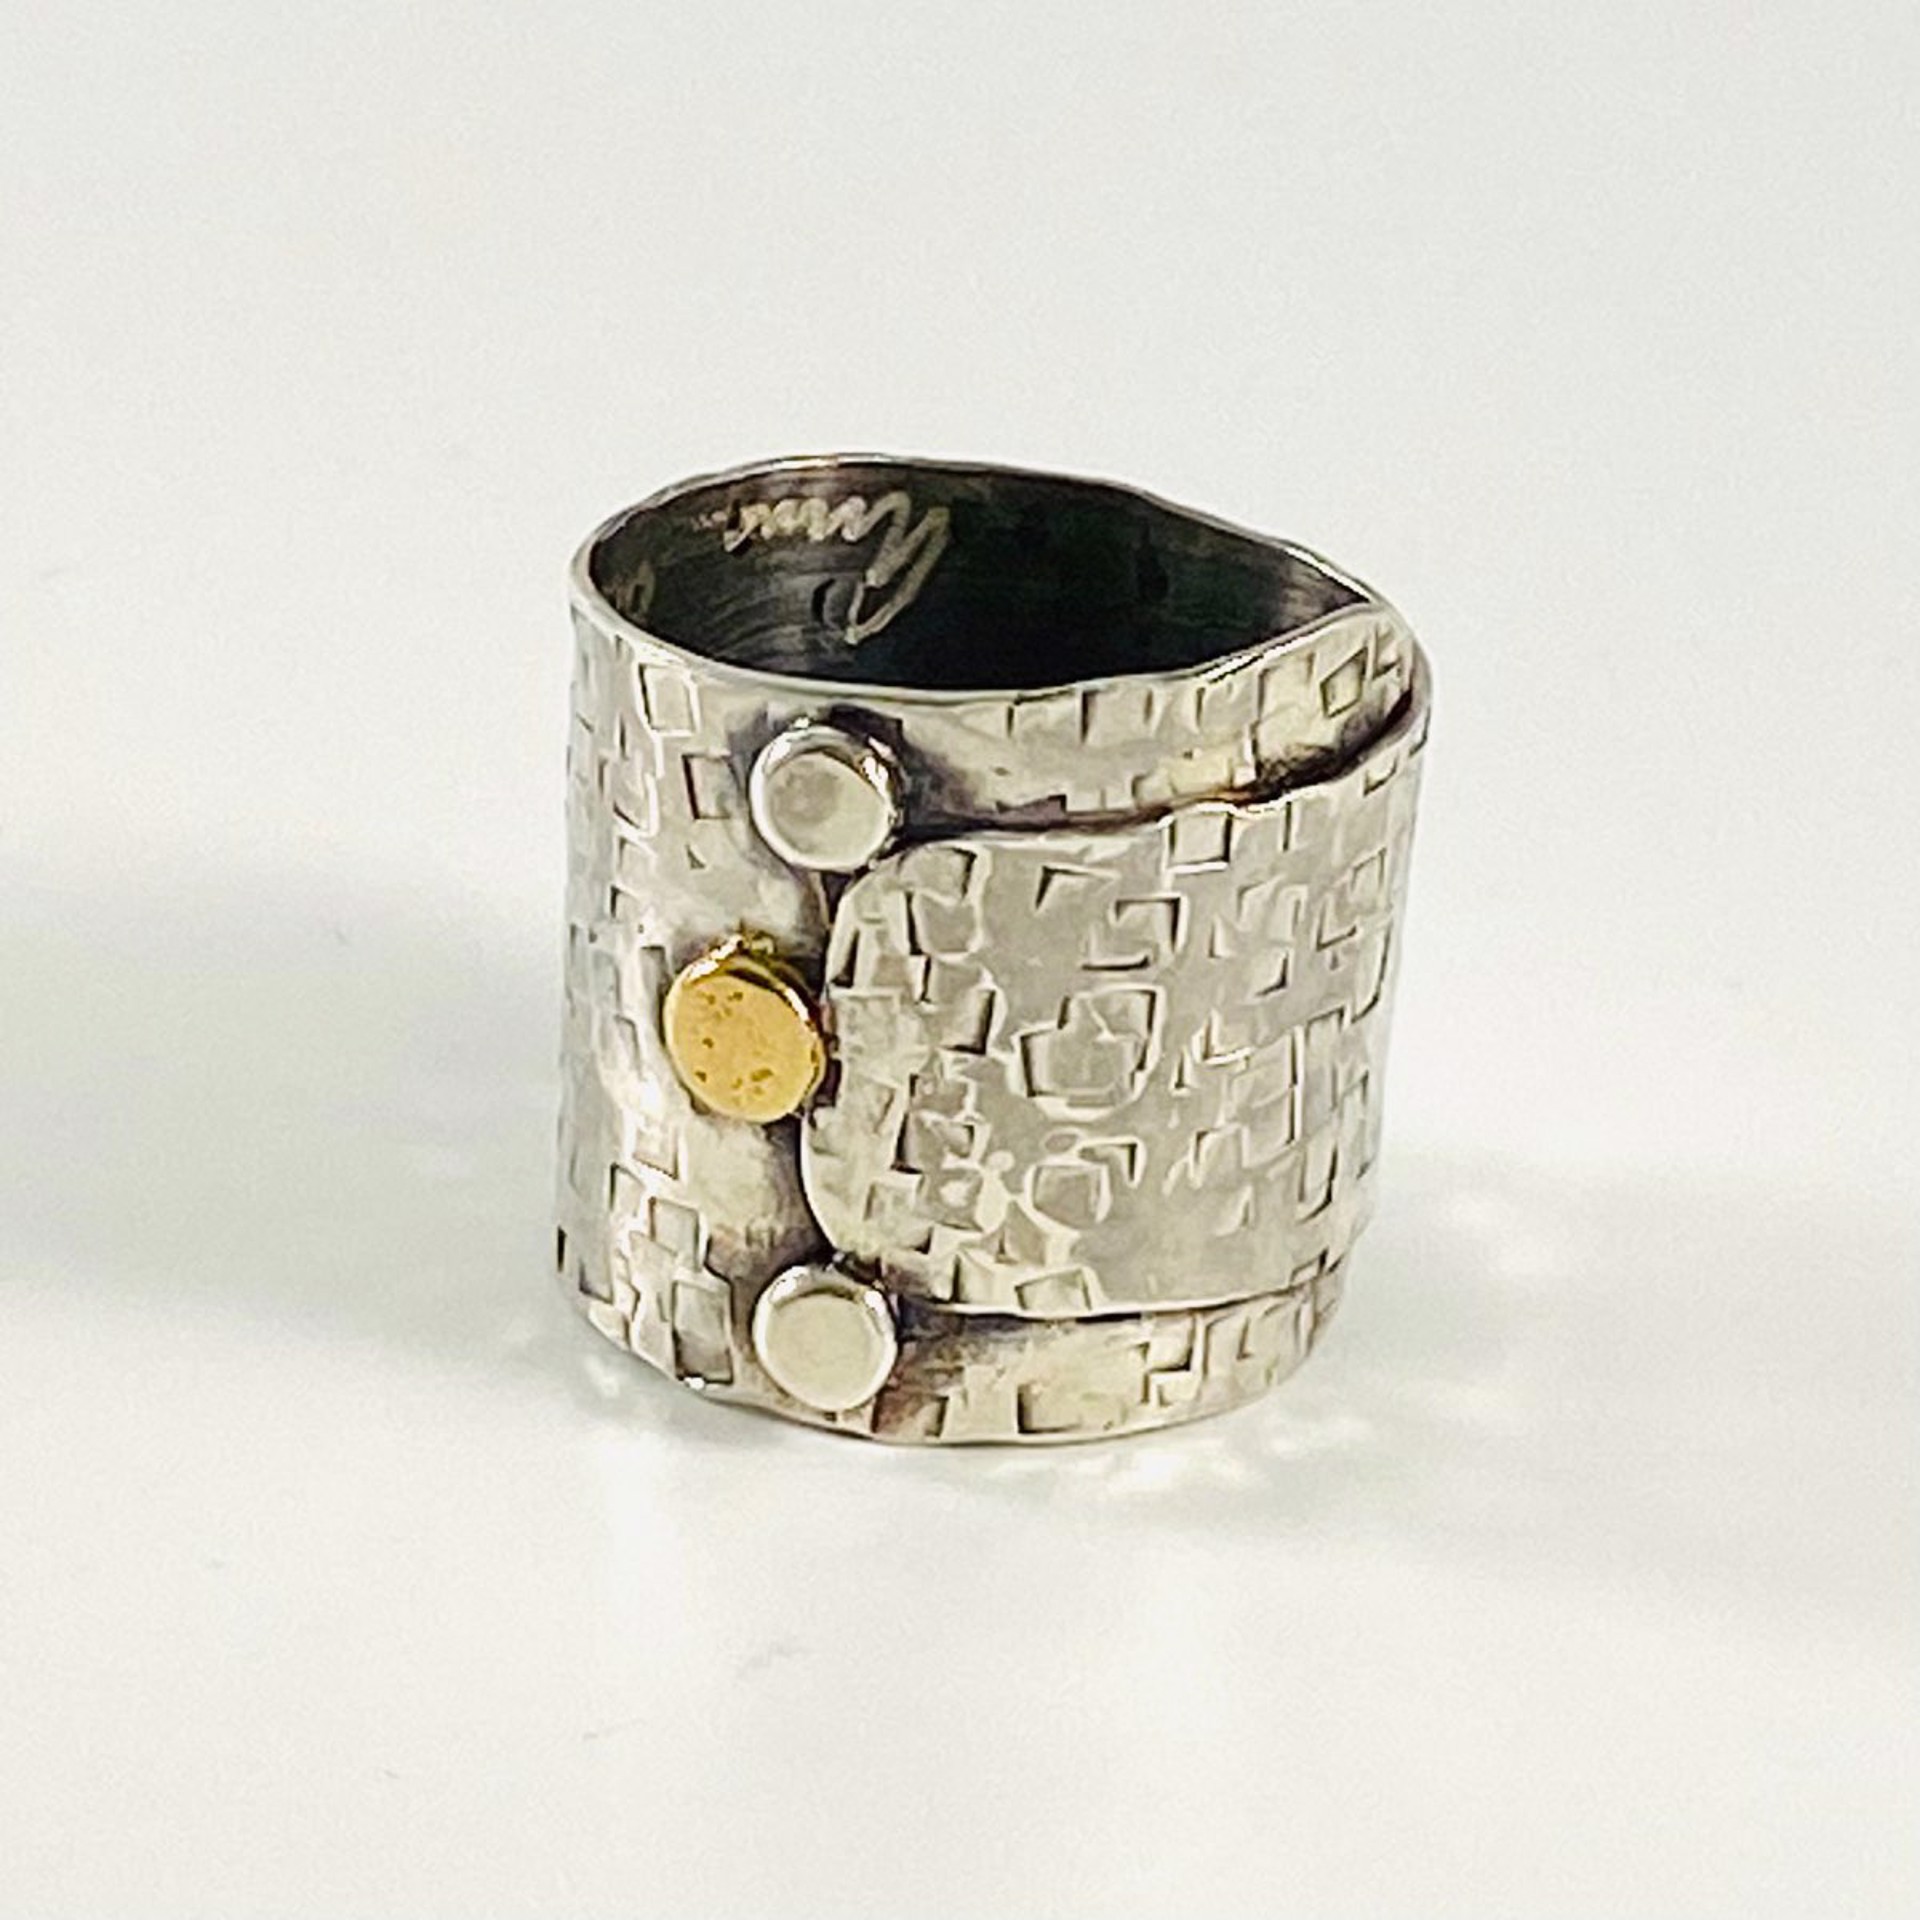 AB22-29 Hammered Band Ring sz6.5 by Anne Bivens